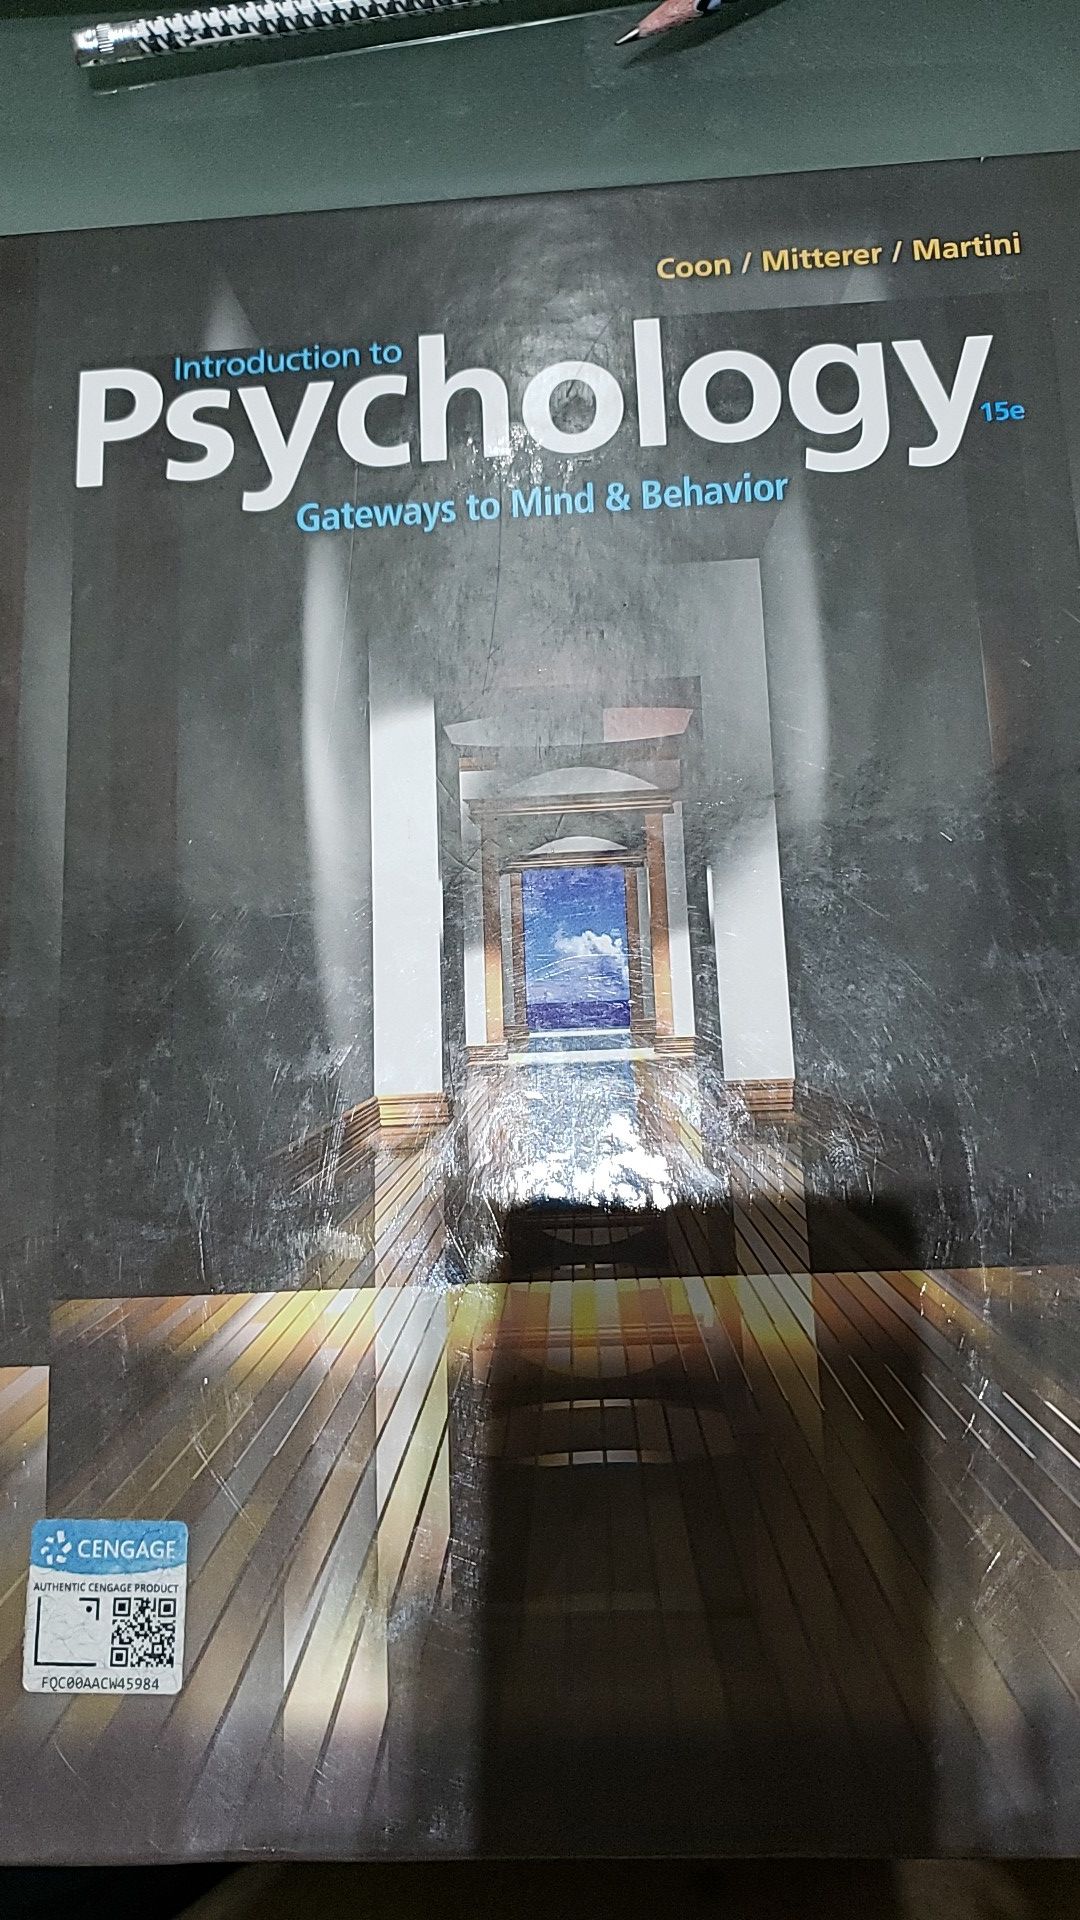 Hardcover Introduction to Psychology 15th edition. Gateways to Mind & Behavior. Coon/Mitterer/Martini